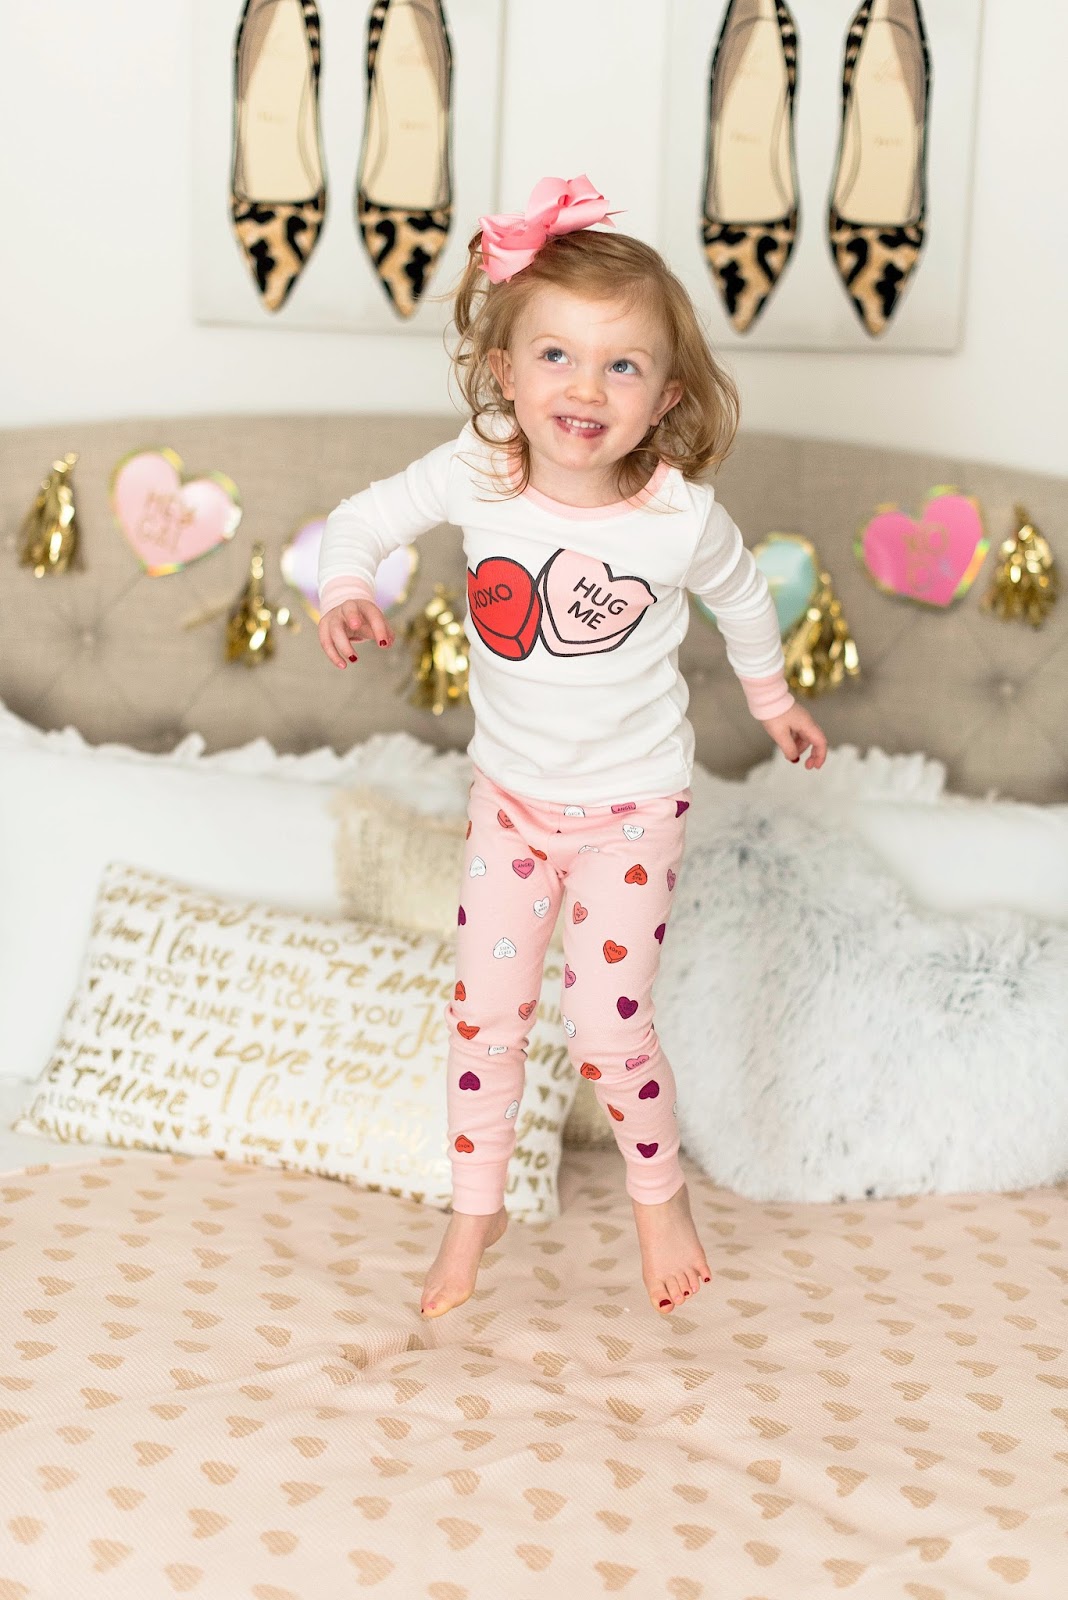 Toddler Valentine Pajamas - Click through to see more on Something Delightful Blog